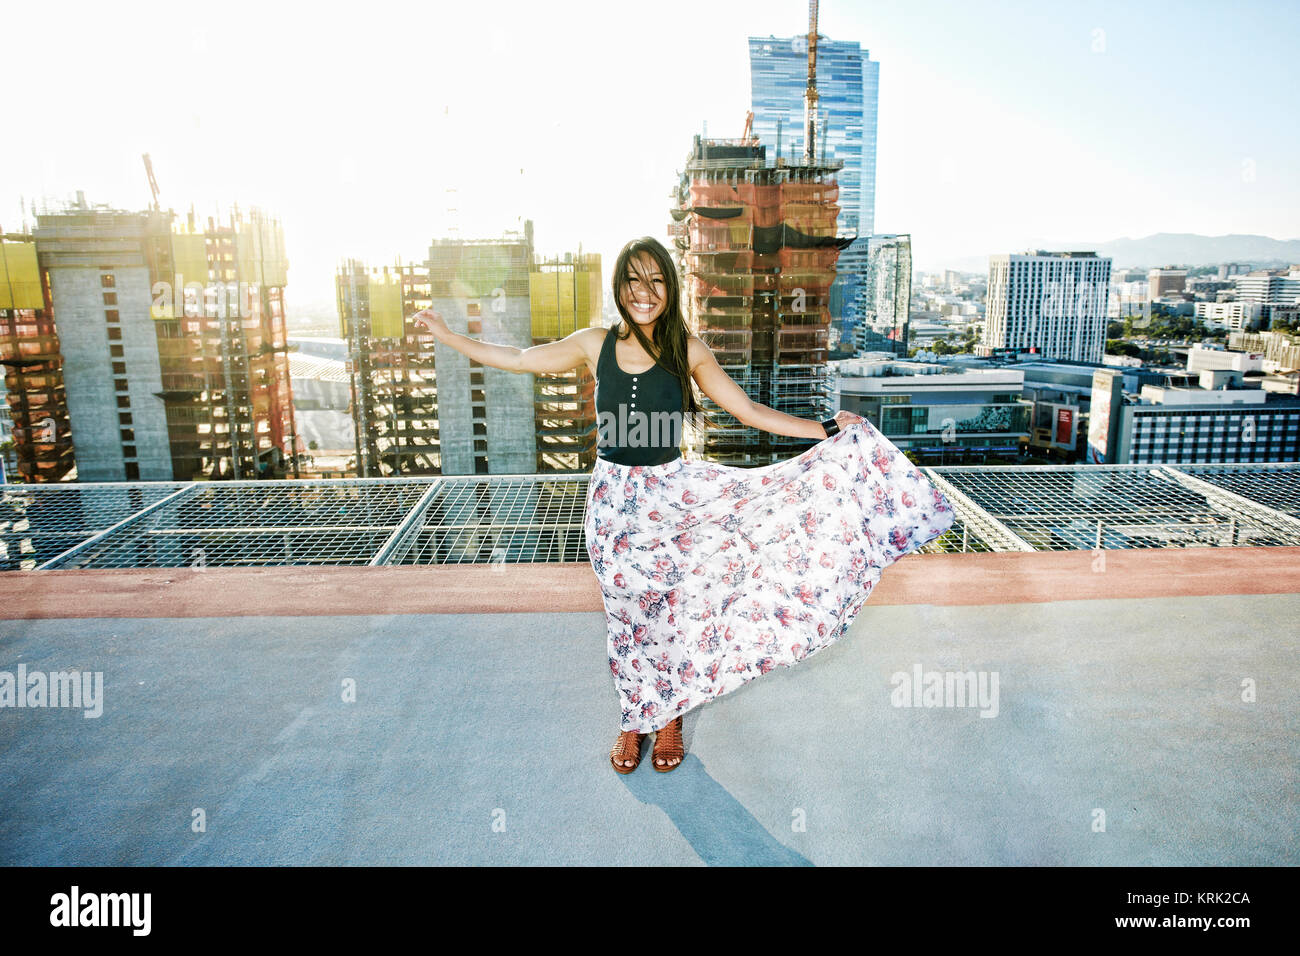 Asian Woman Dancing on urban rooftop Banque D'Images